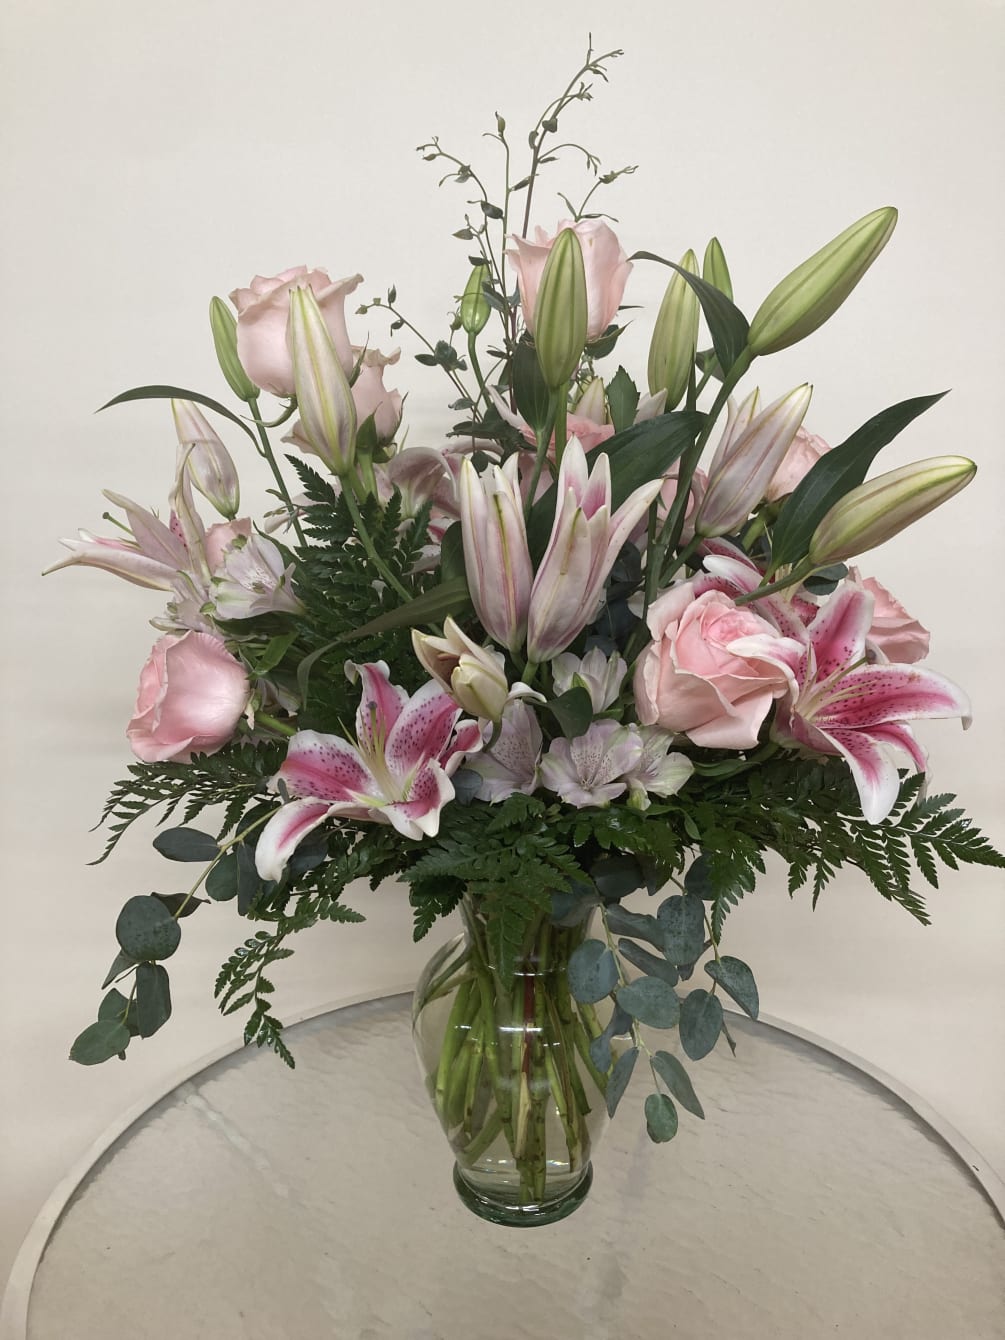 Stargazers and pink roses share space among the eucalyptus and leatherleaf.